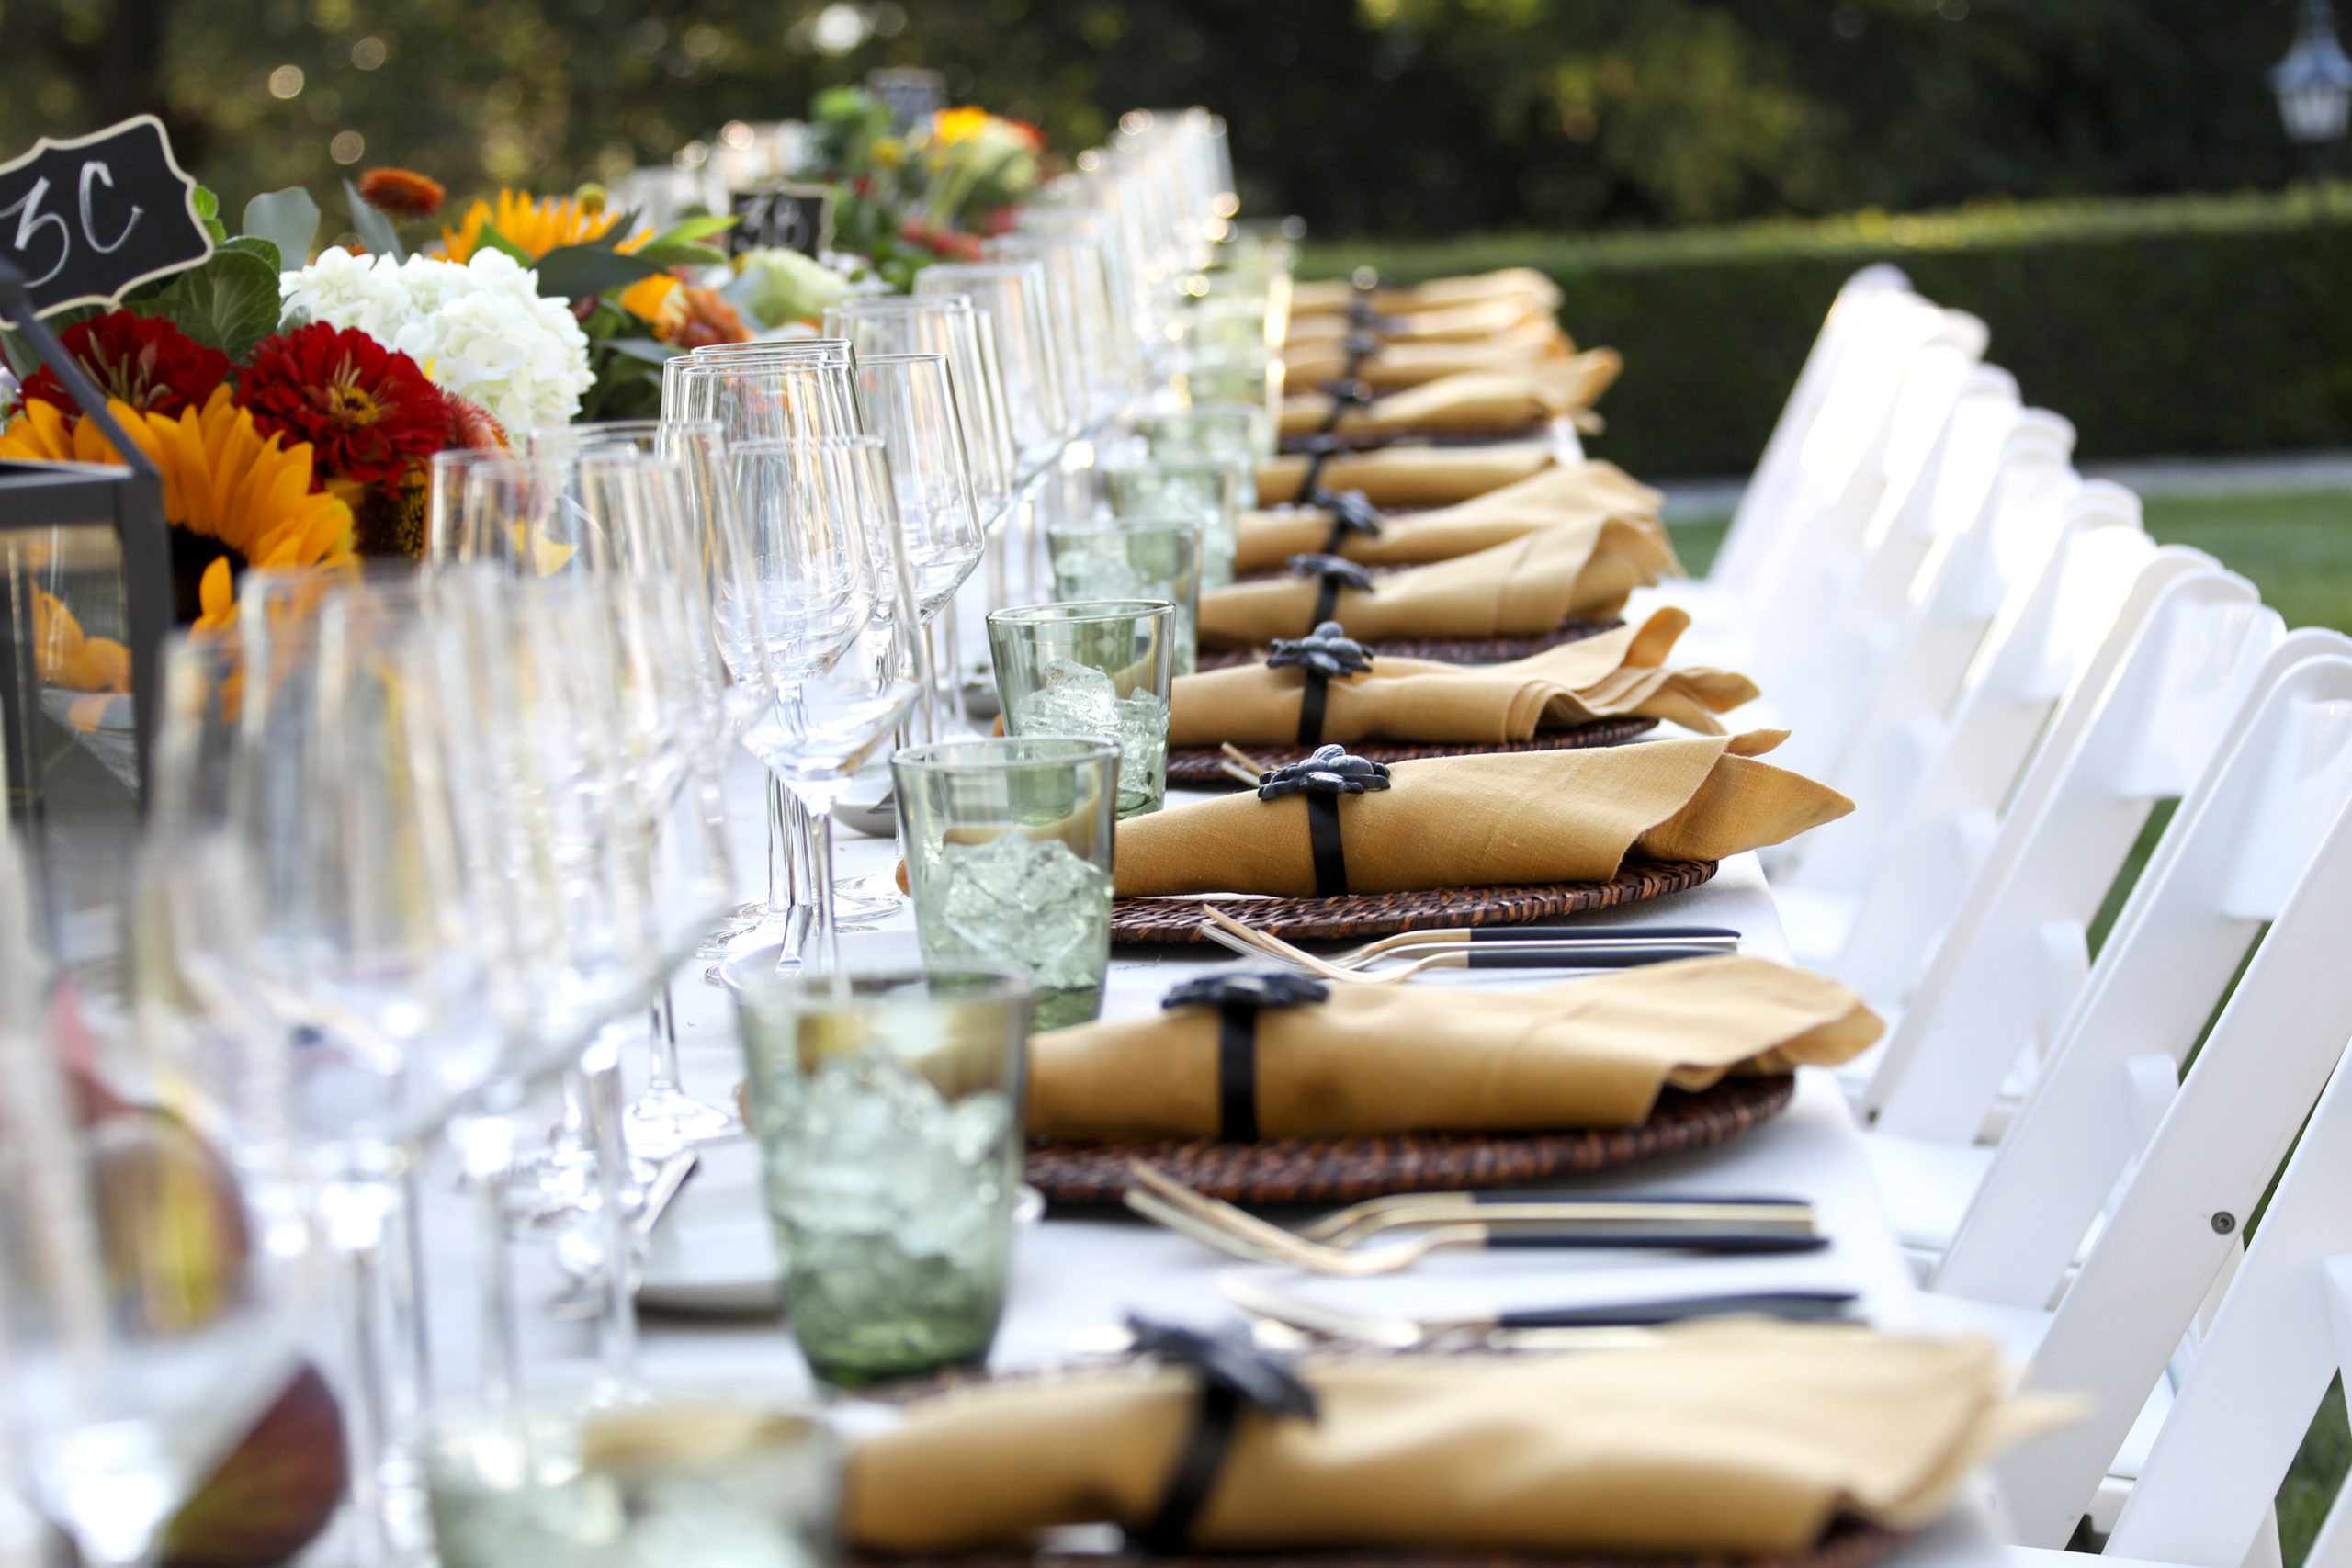 Outdoor table set for an event at Jordan Winery